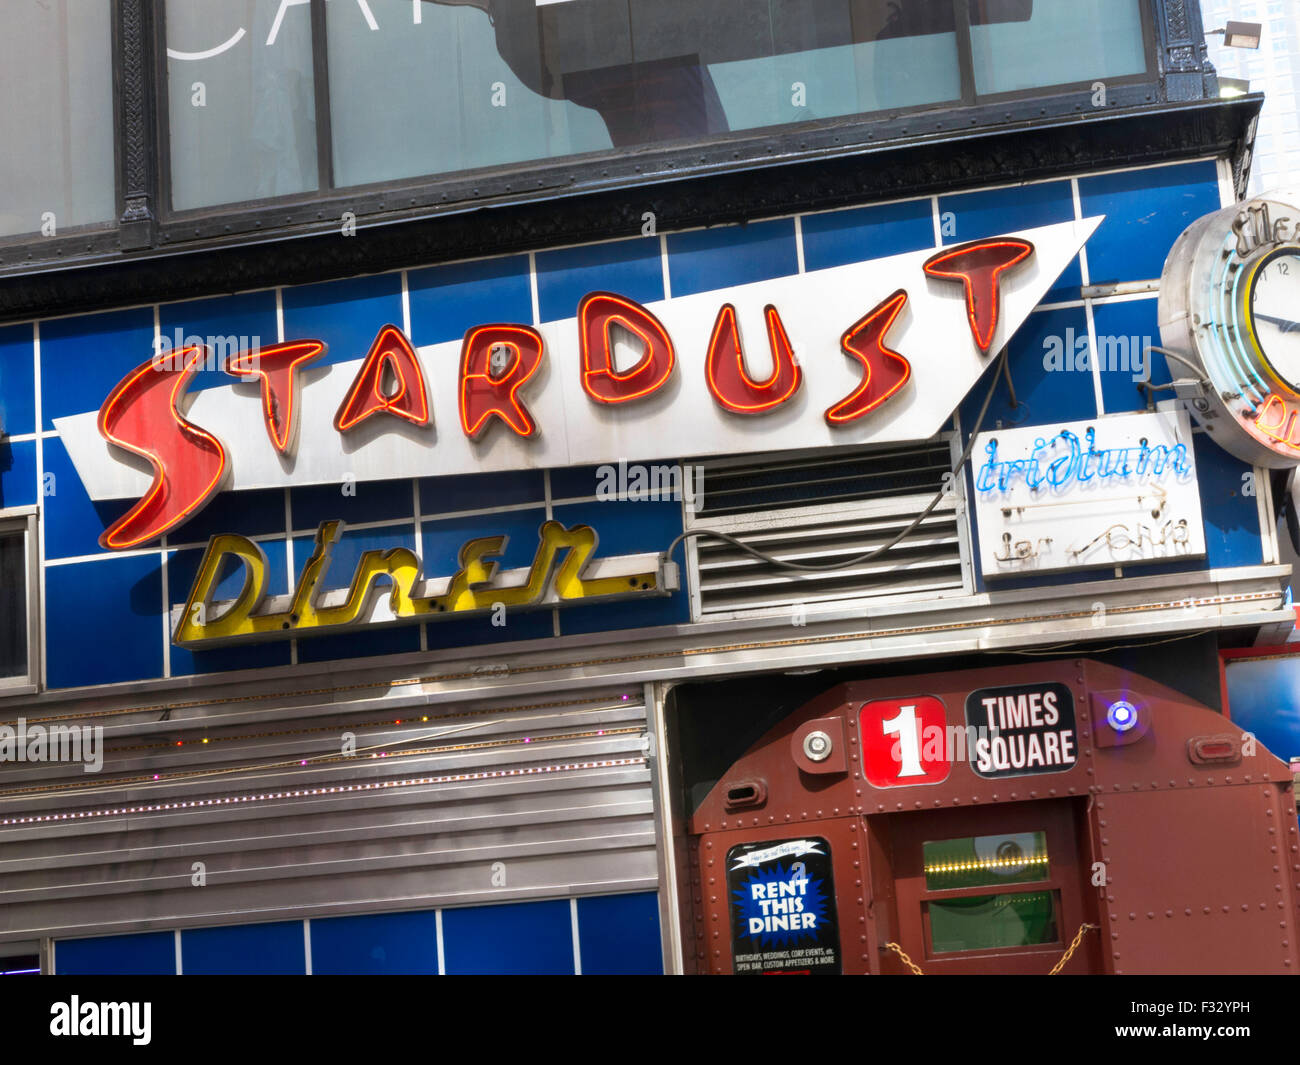 Stardust Diner Neon, Times Square, NYC, USA Stock Photo